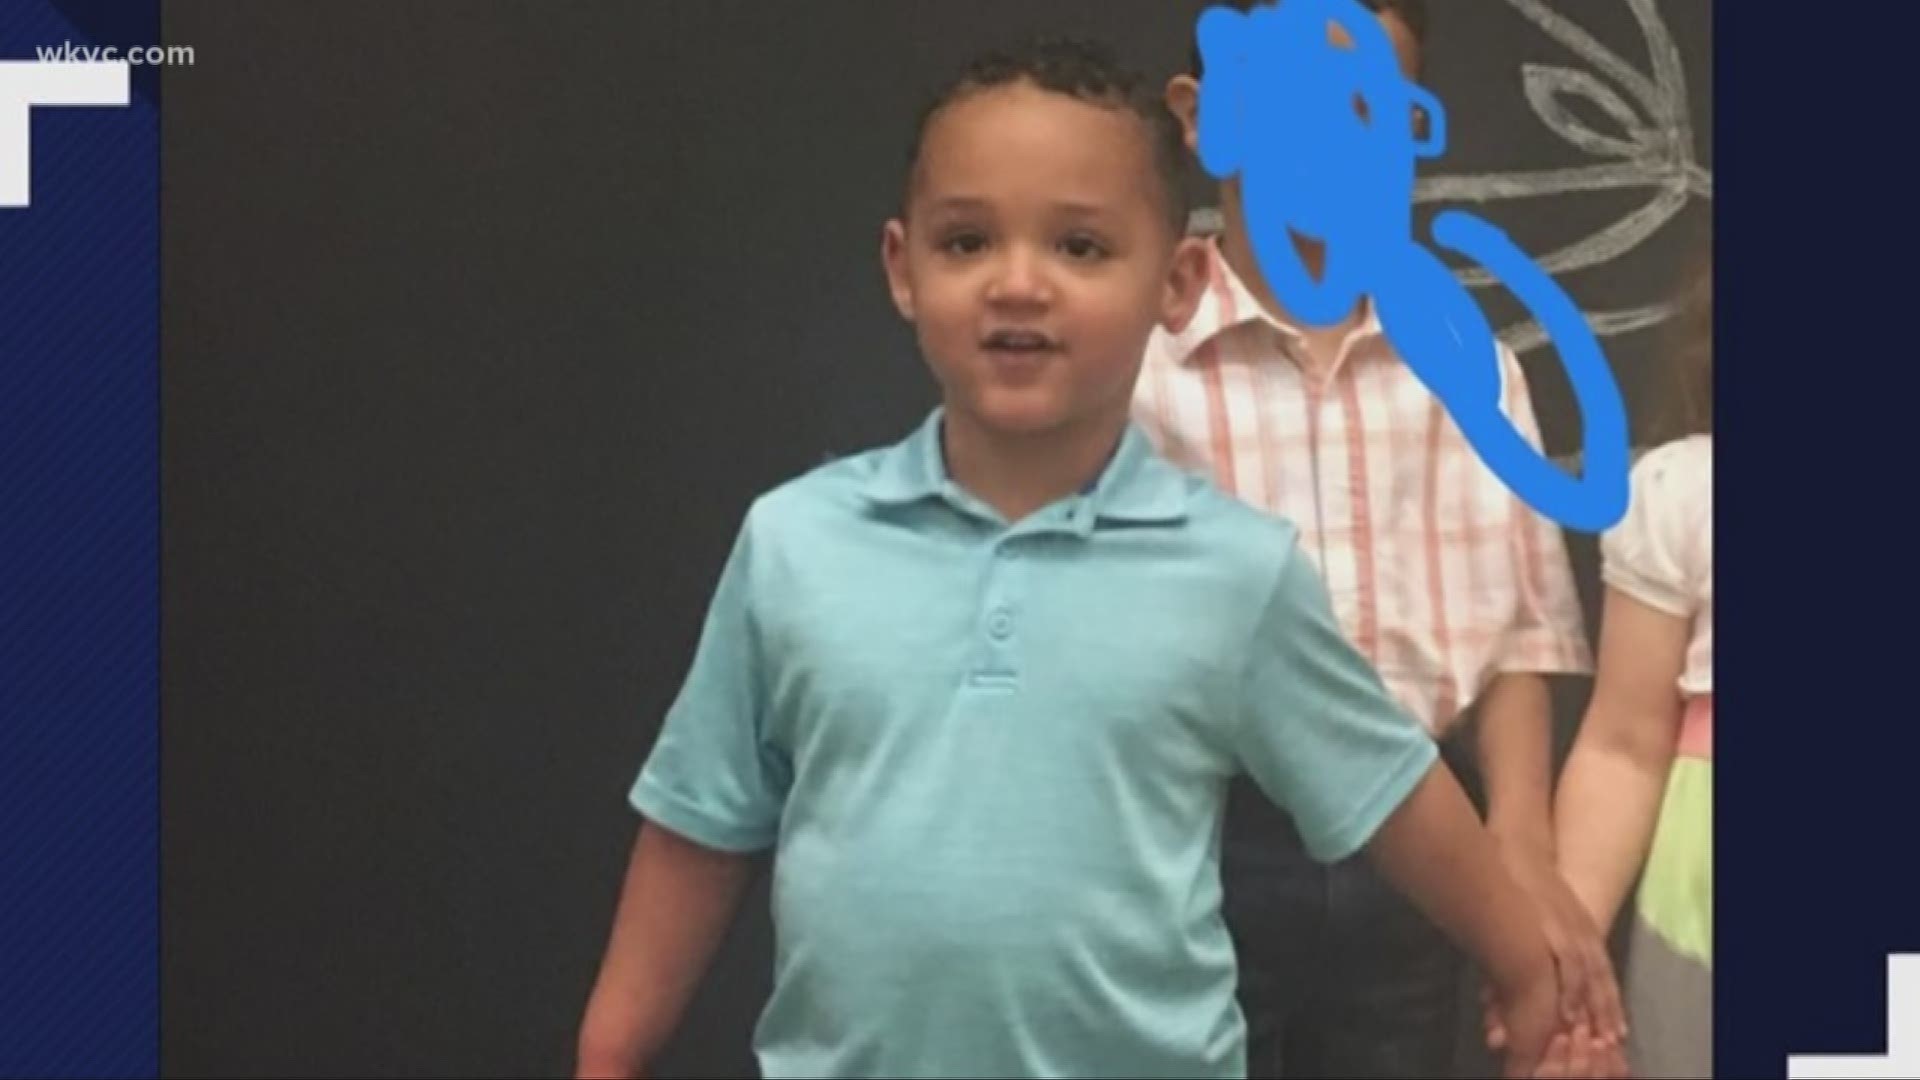 April 22, 2019: Great news! Authorities have found 2-year-old Kaven Fisher, who was reported missing overnight in Green. Kaven, who is non-verbal and autistic, was located at 8:55 a.m. inside a neighbor's vehicle that was parked in a garage just a few houses away from where he disappeared.